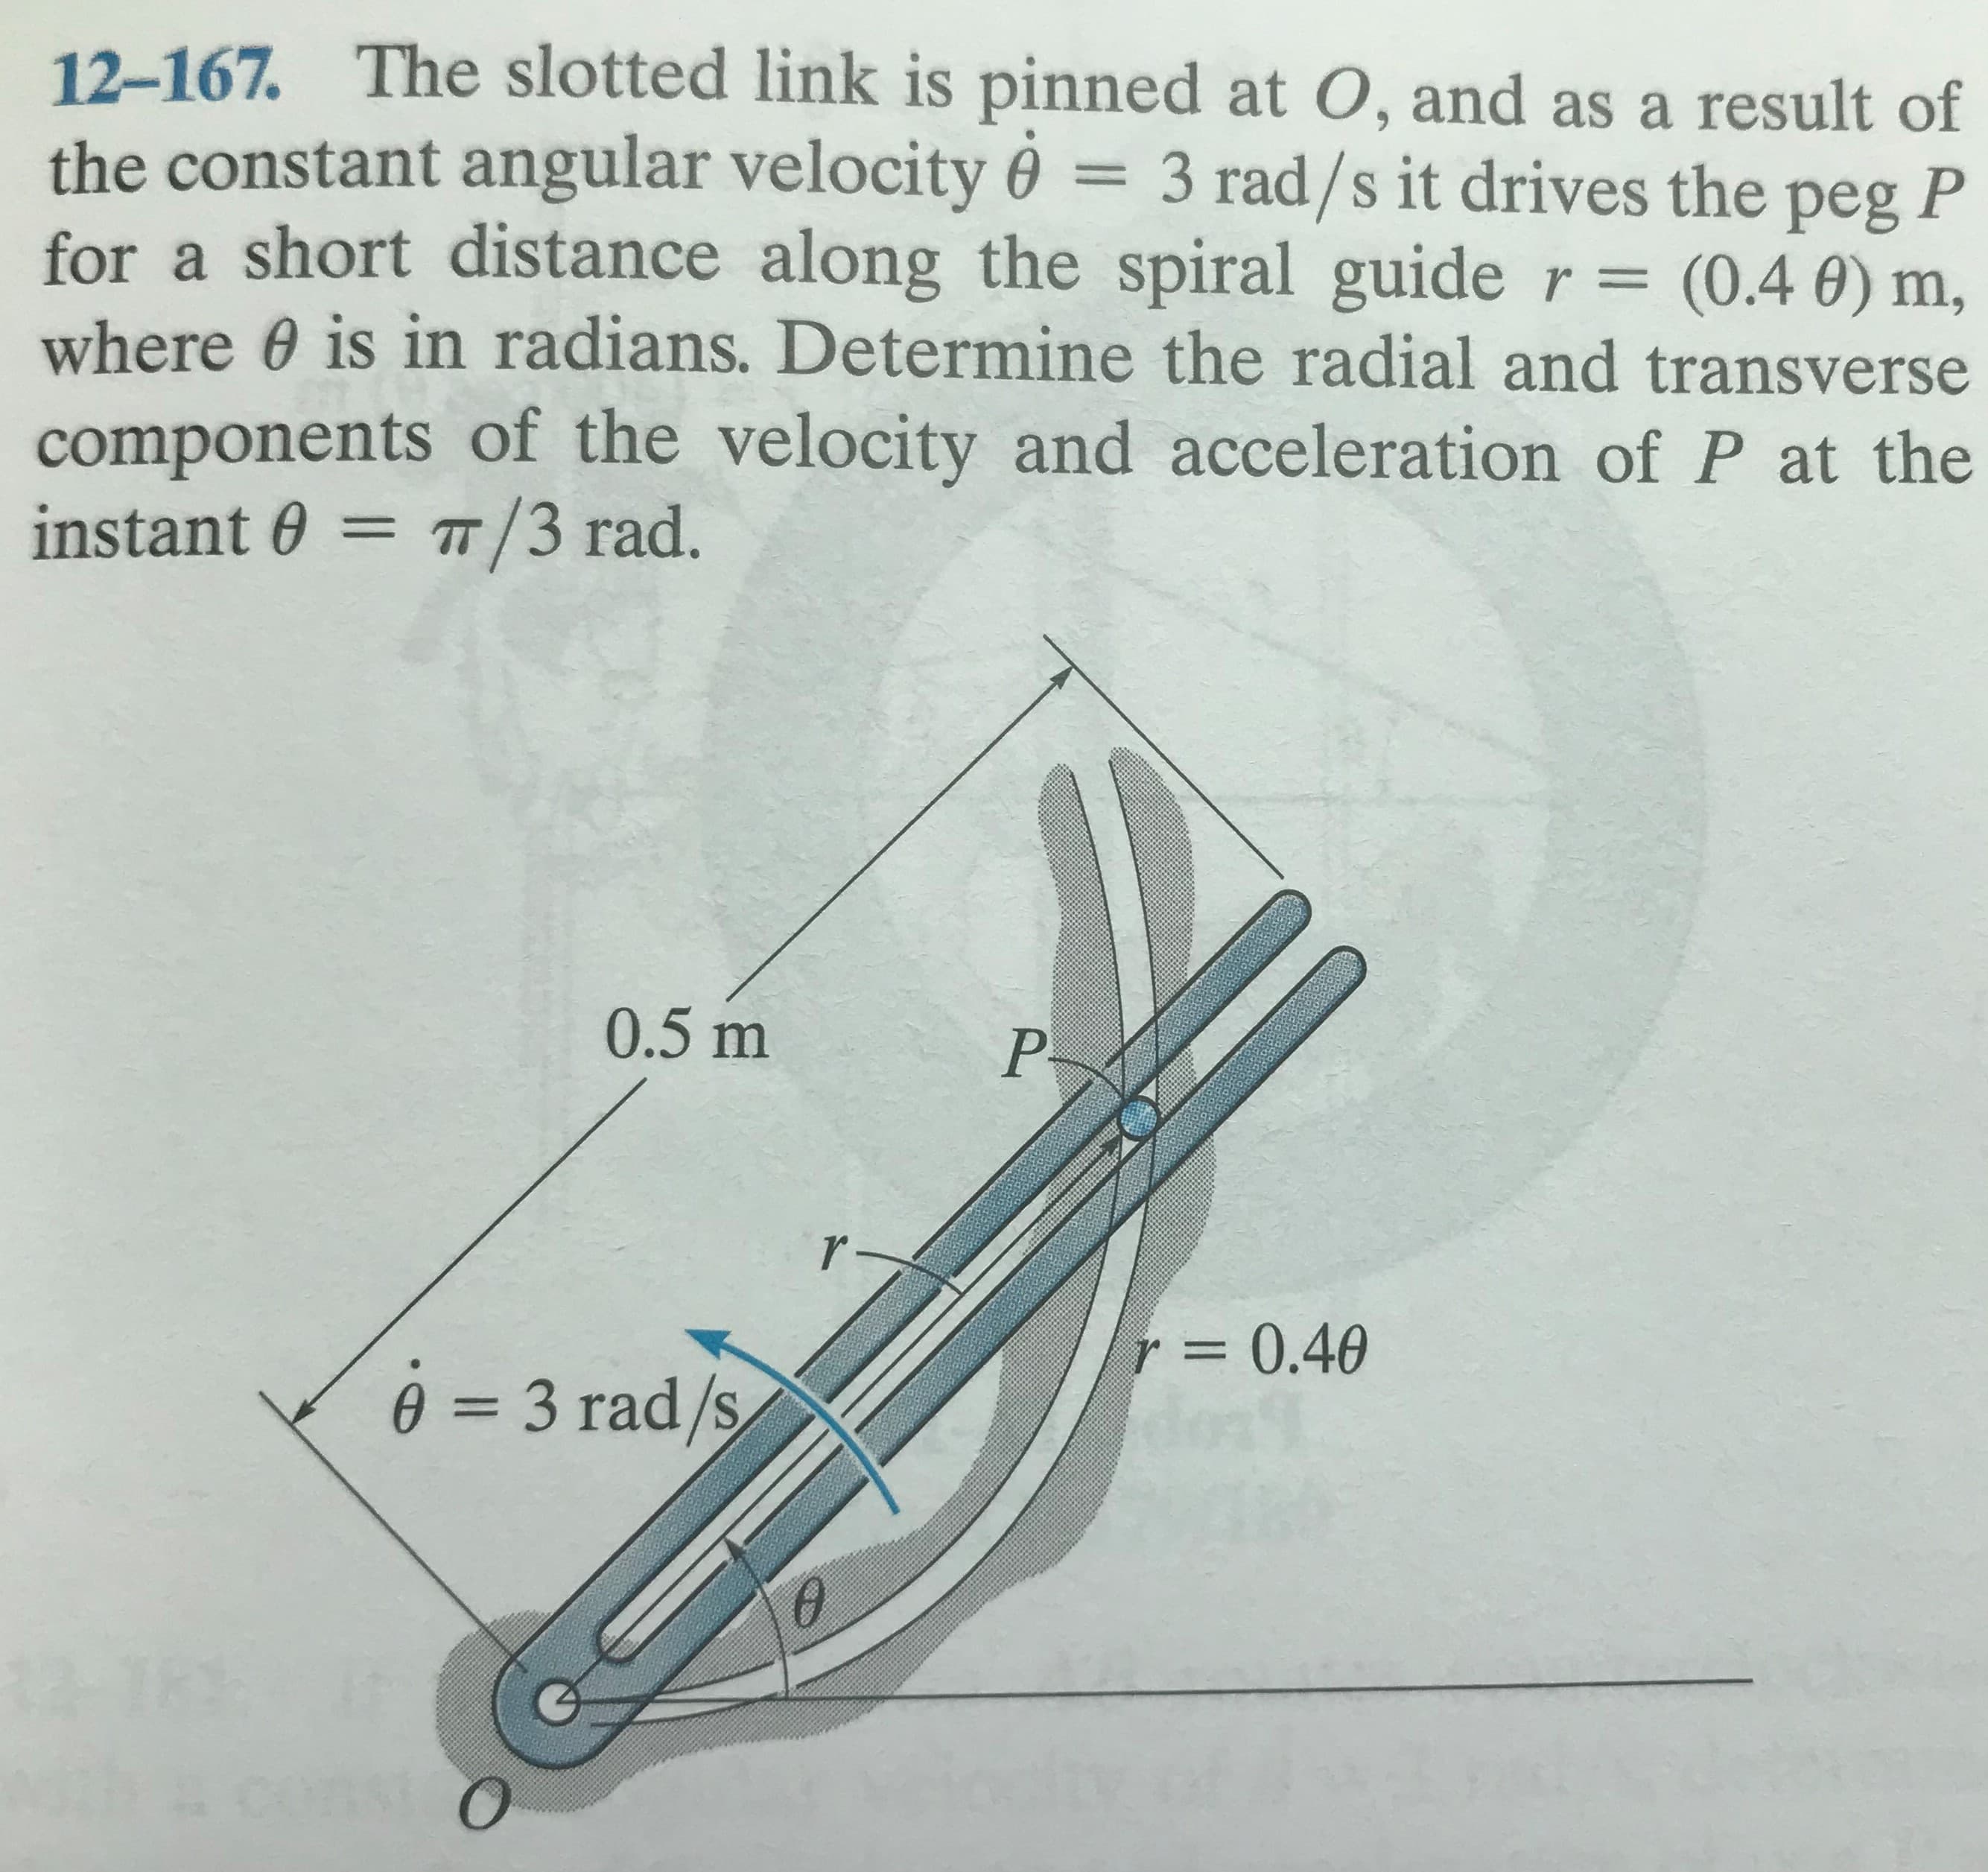 12-167. The slotted link is pinned at O, and as a result of
the constant angular velocity 0 = 3 rad/s it drives the peg P
for a short distance along the spiral guide r = (0.4 0) m,
where 0 is in radians. Determine the radial and transverse
components of the velocity and acceleration of P at the
instant 0 = /3 rad.
0.5 m
=0.40
e = 3 rad/s
%3D
